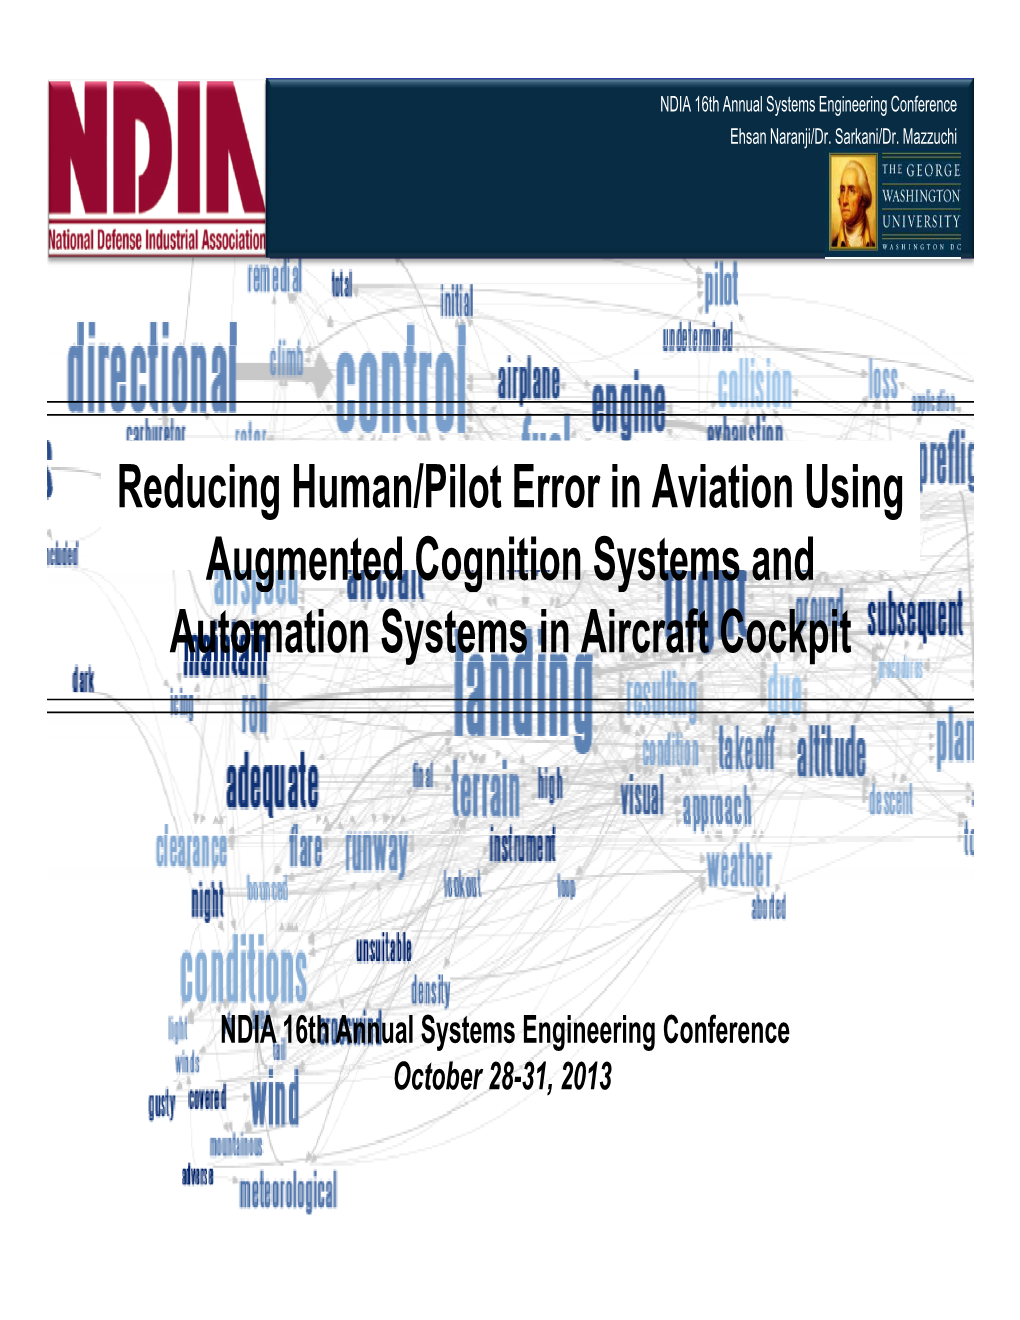 Reducing Human/Pilot Error in Aviation Using Augmented Cognition Systems and Automation Systems in Aircraft Cockpit